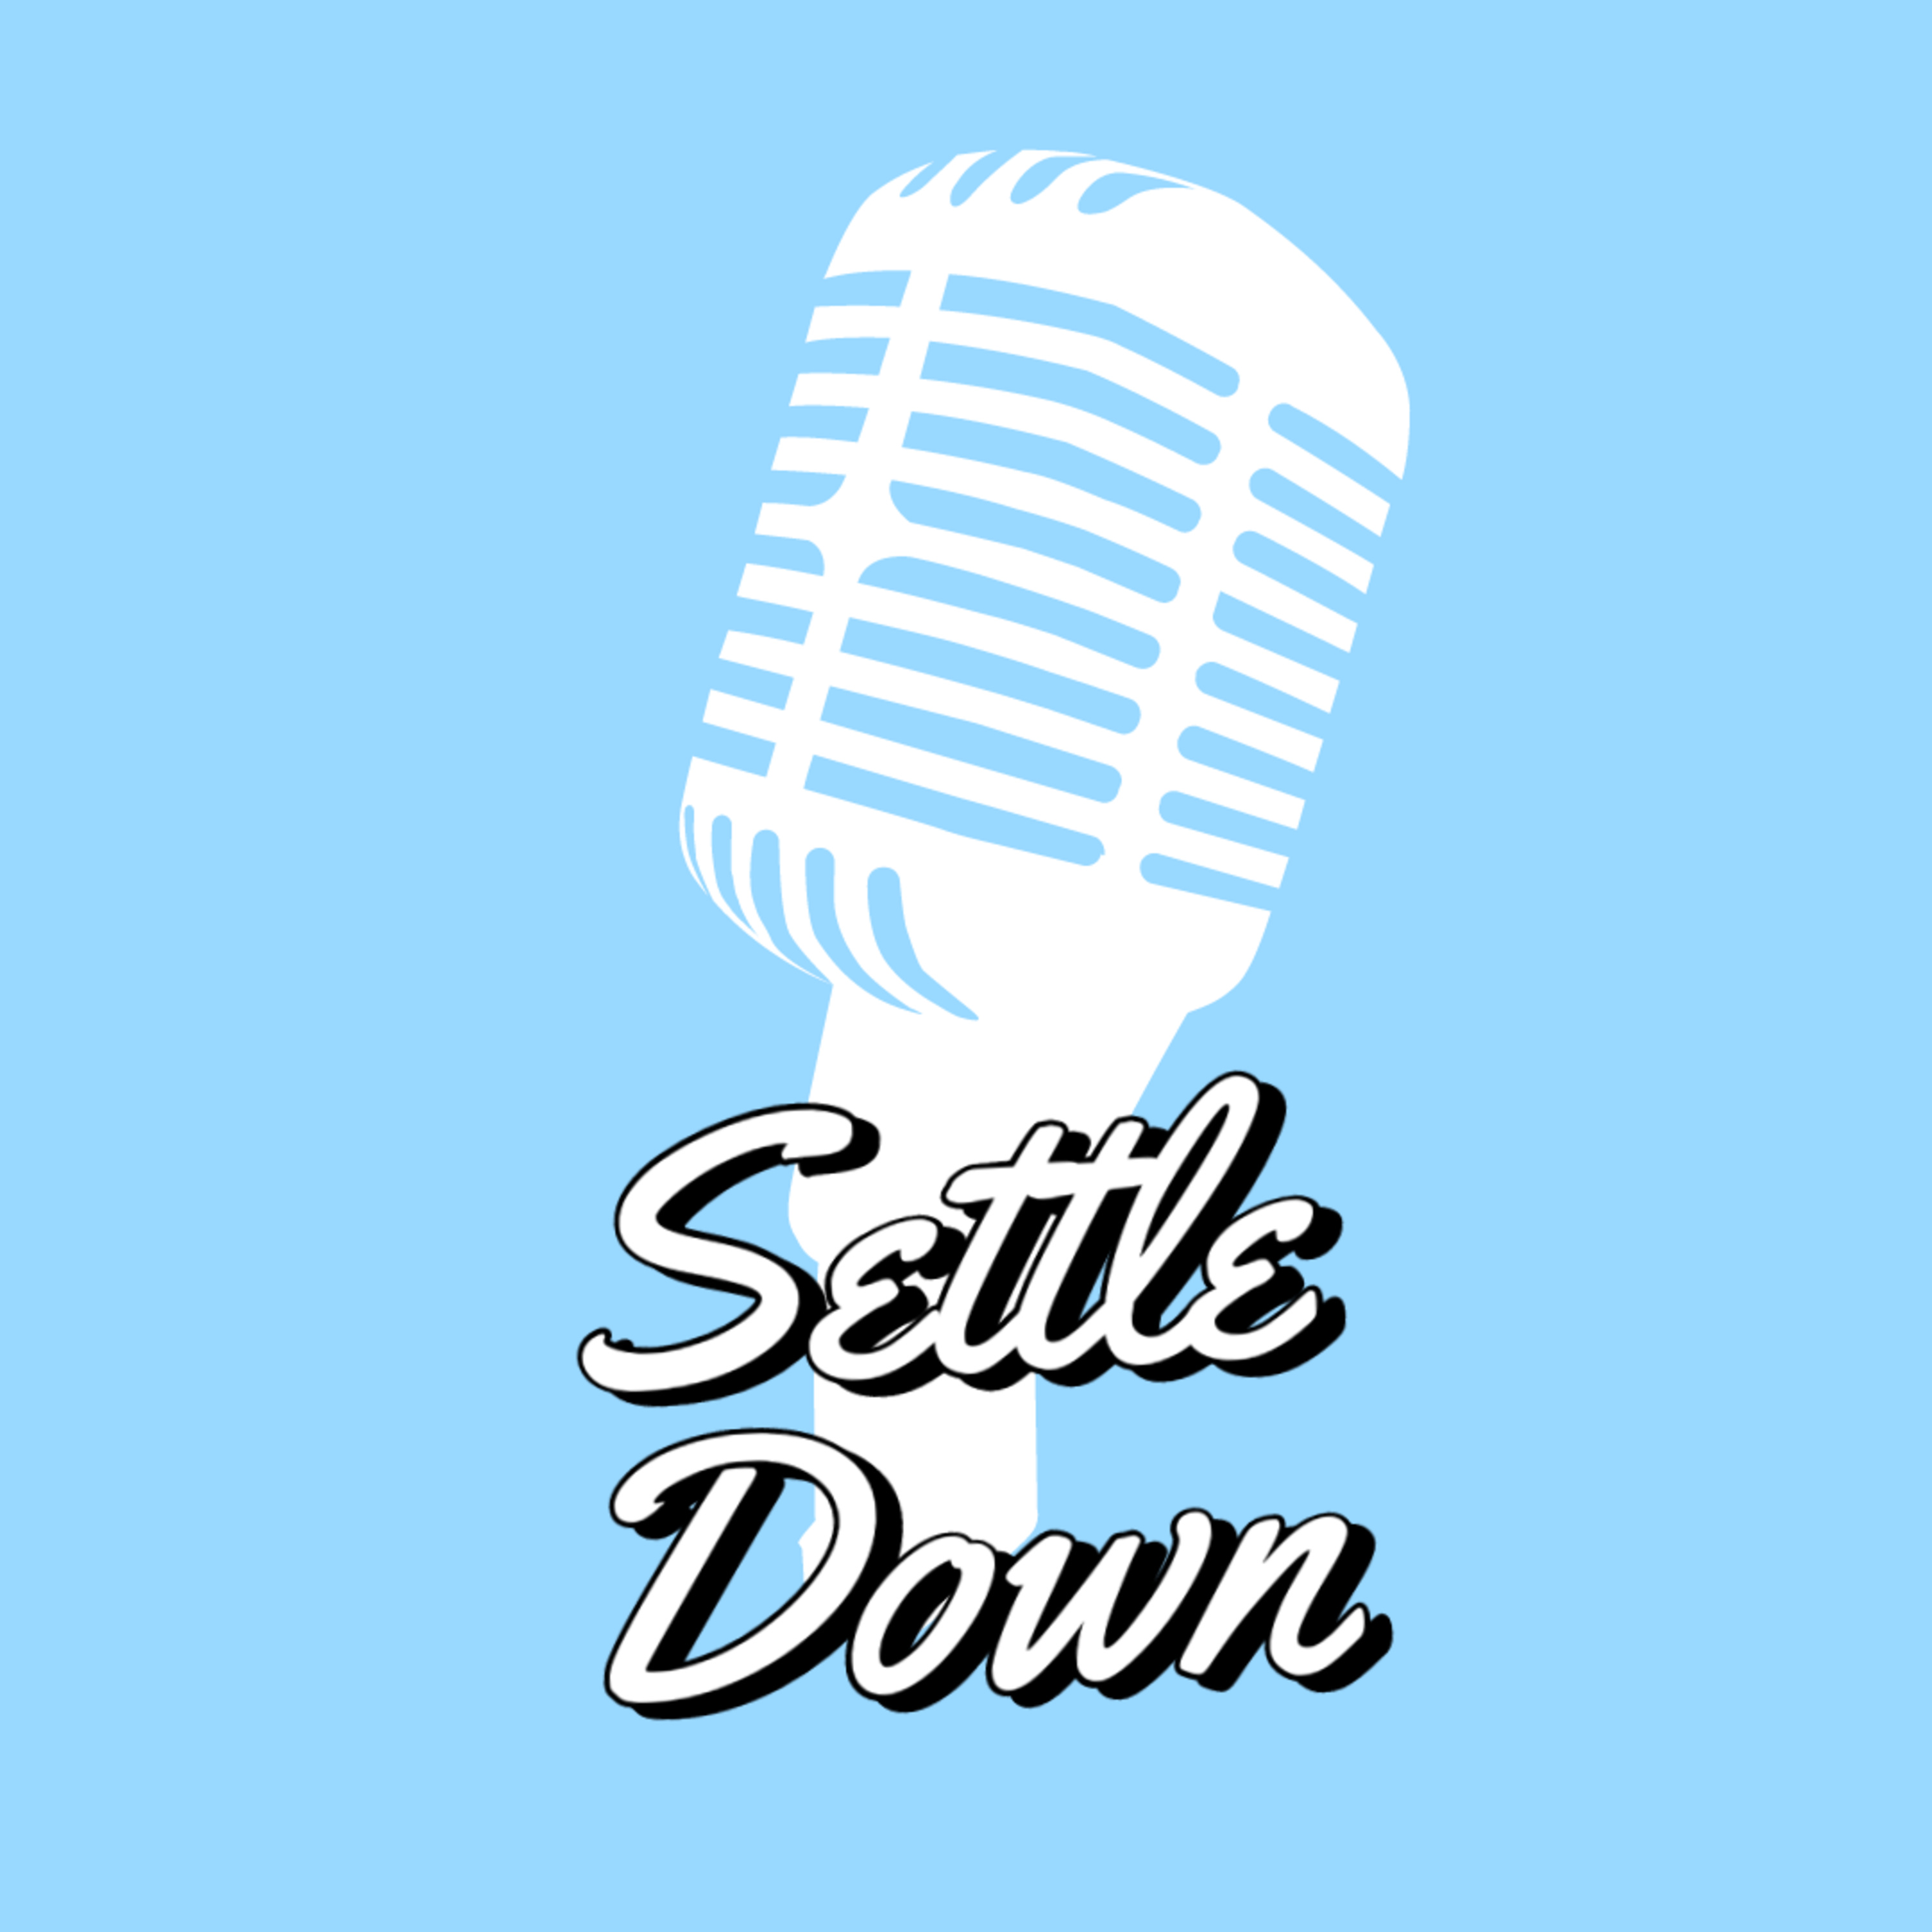 Settle Down Episode 18: Vacation Time